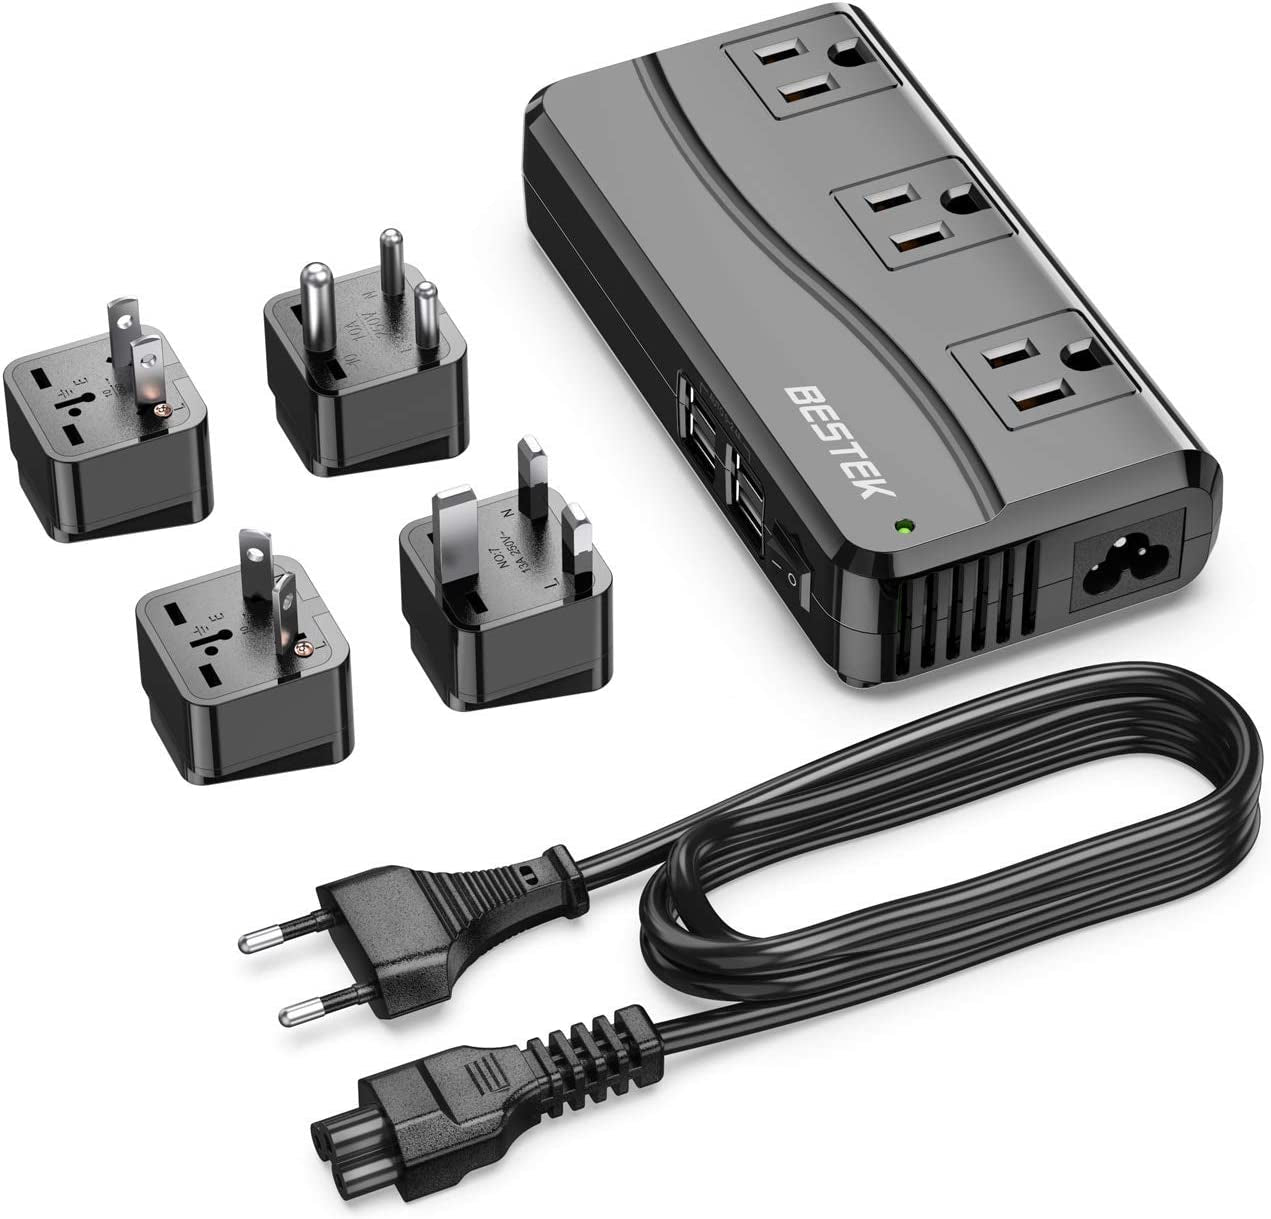 Voltage Converter and Travel Adapter with USB Charging Ports and Multiple Plug Options for Worldwide Use